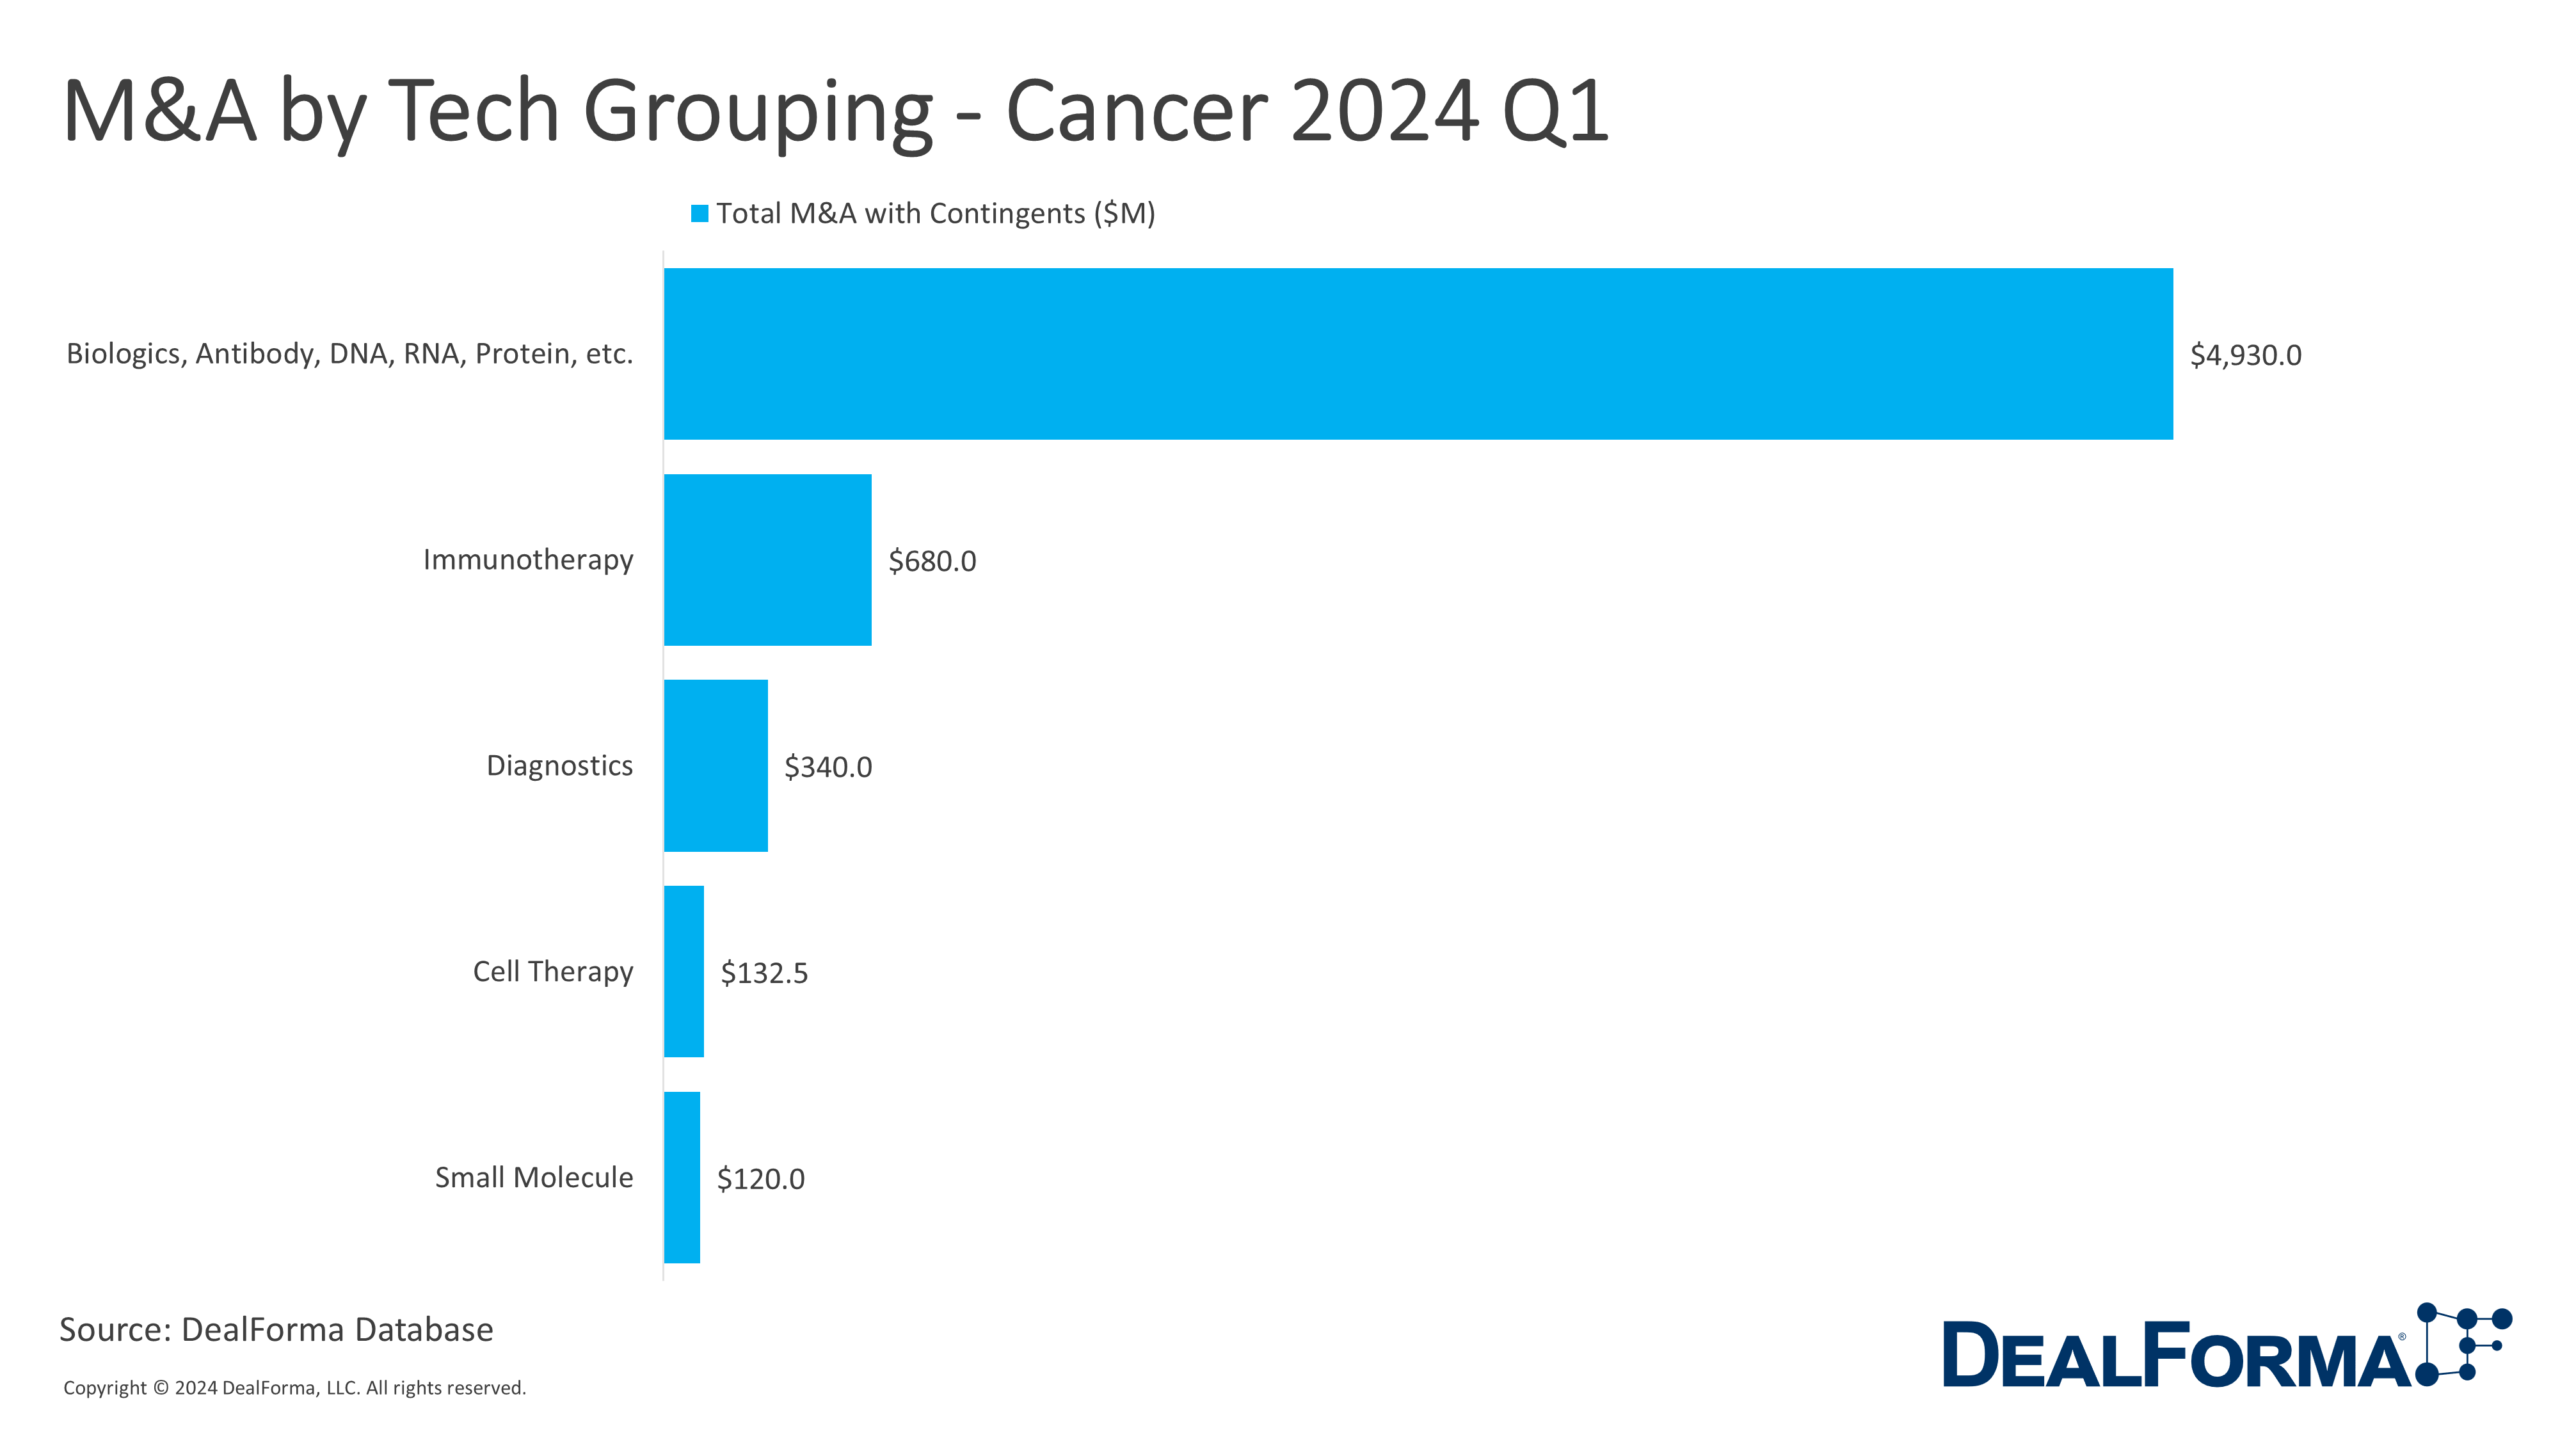 M&A by Tech Grouping - Cancer 2024 Q1